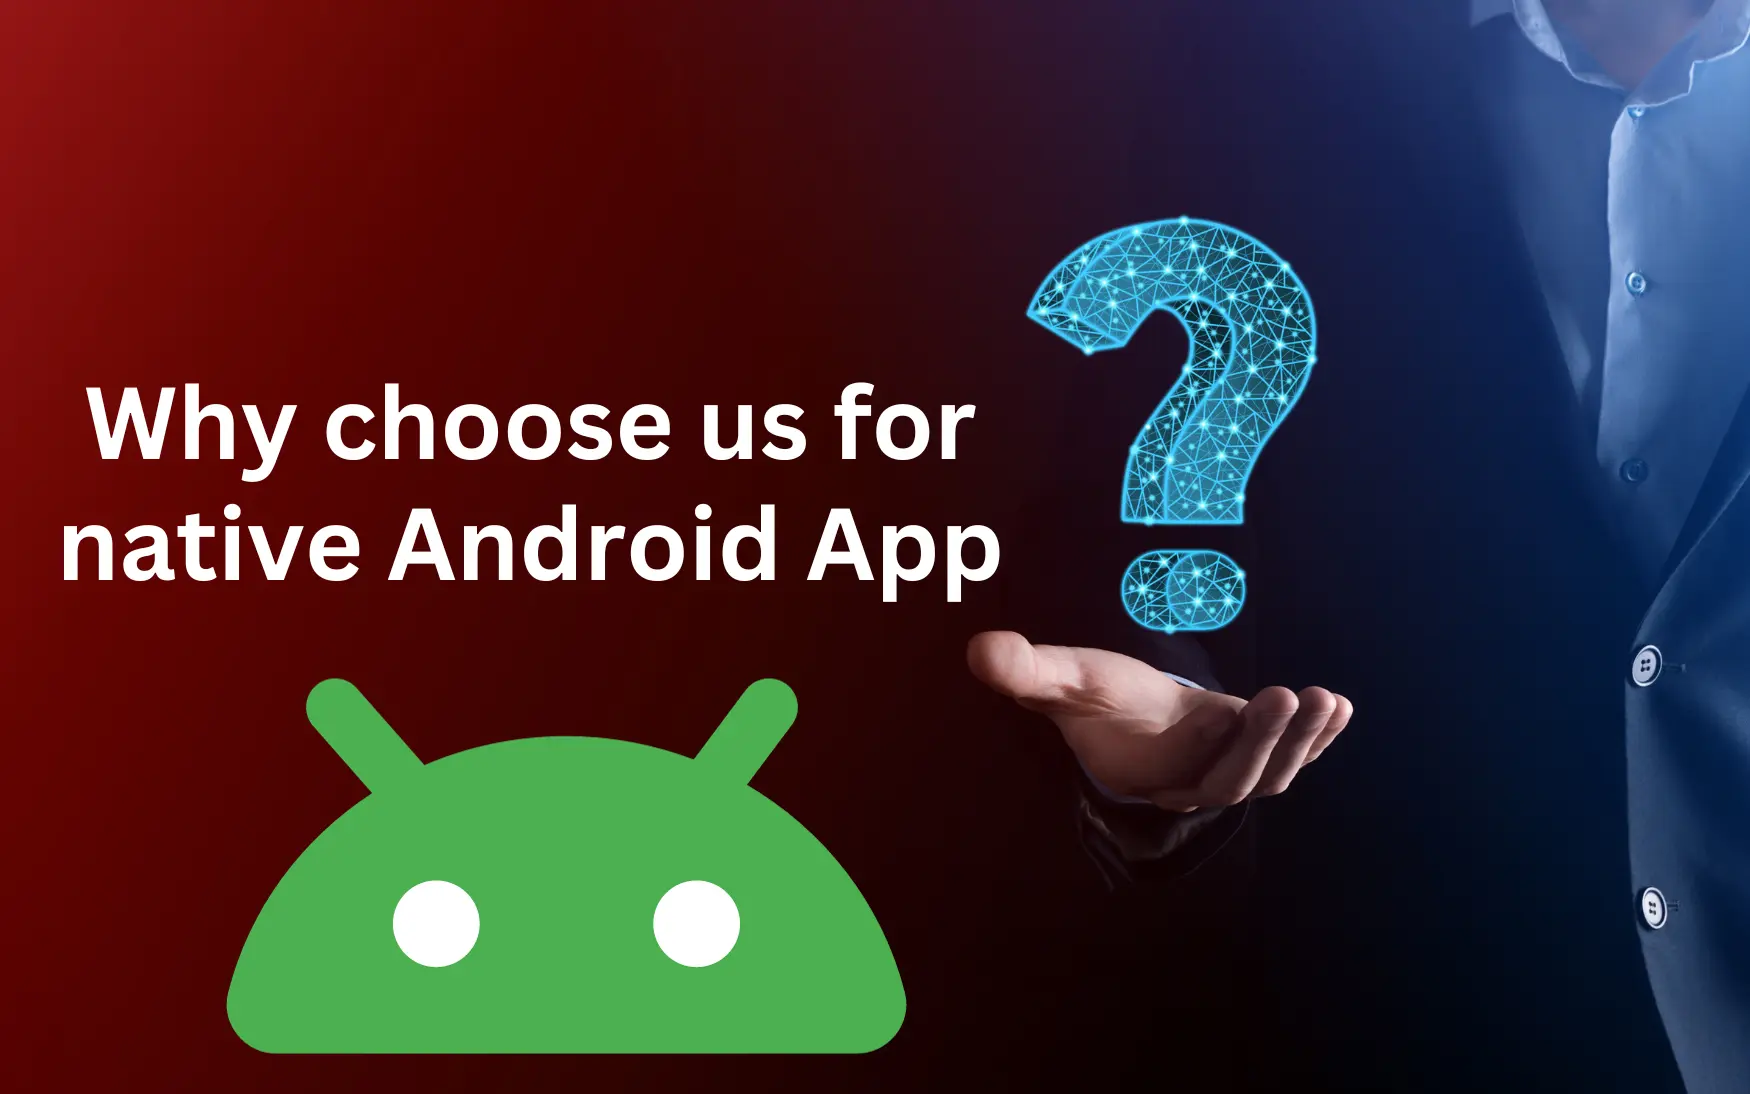 Why choose us for native Android App